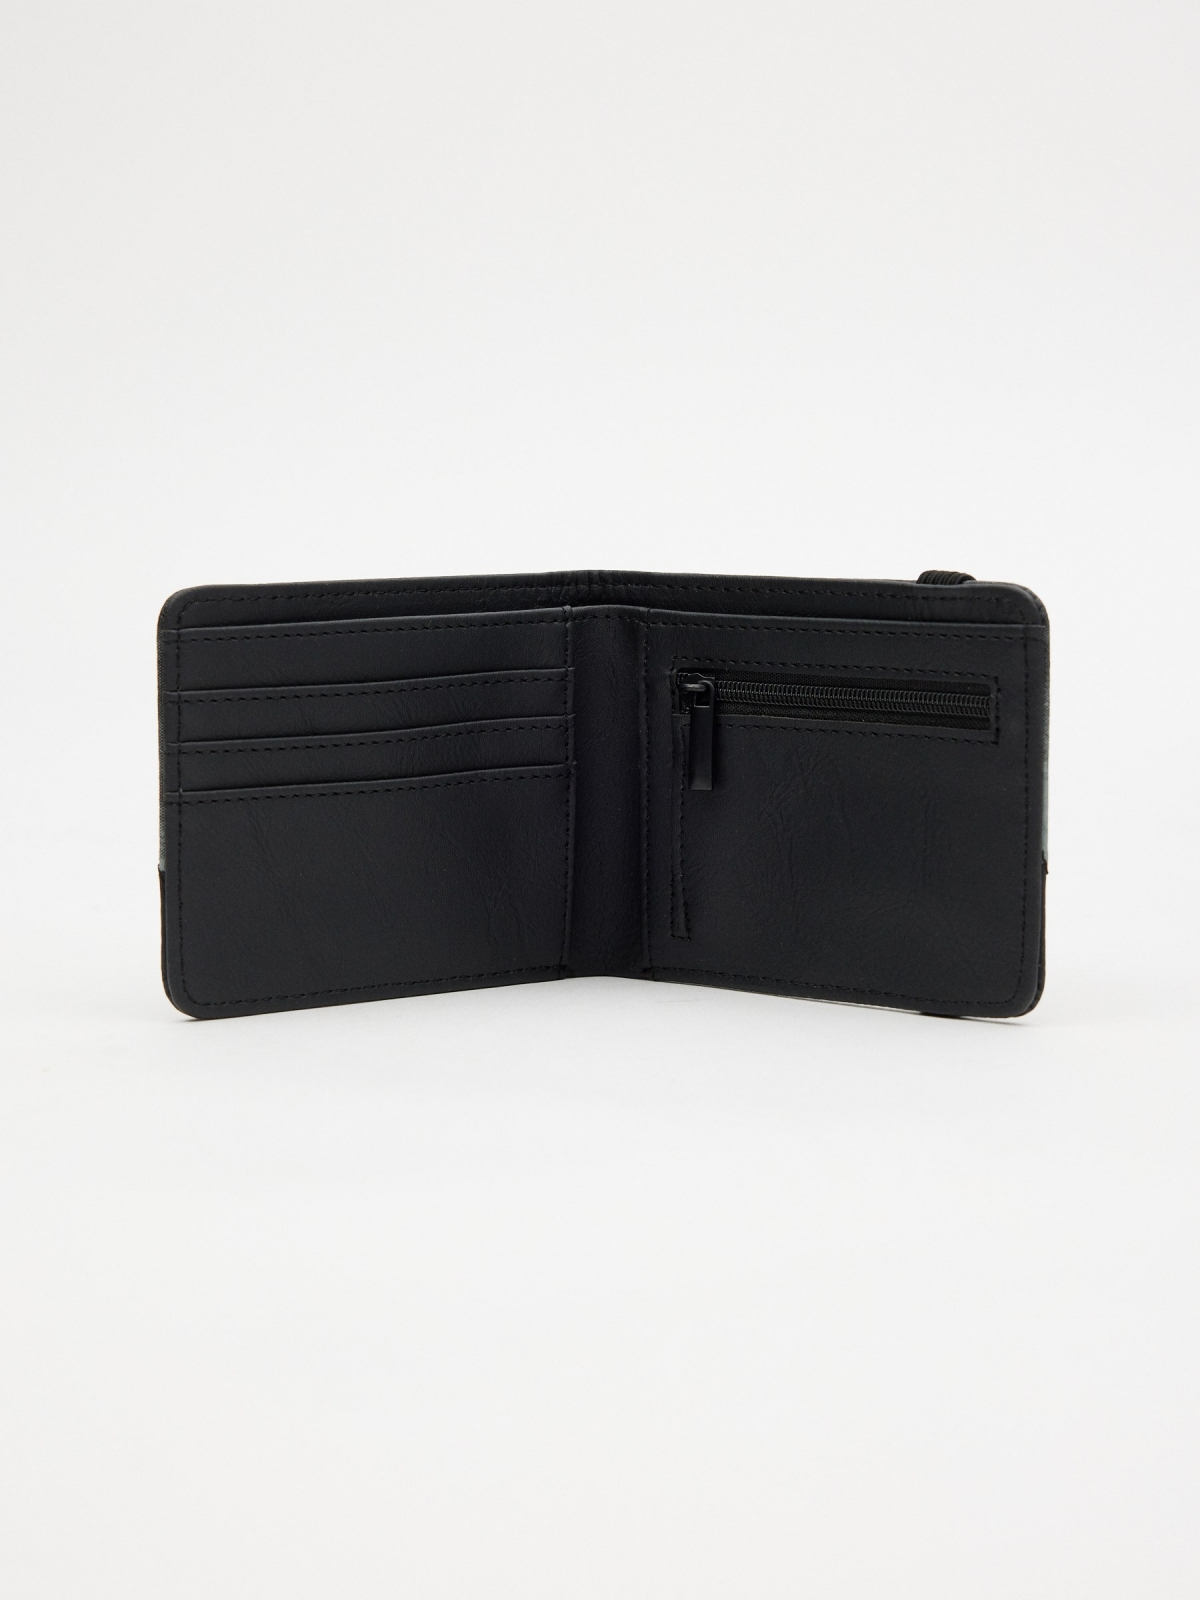 Leatherette wallet with rubber clasp black 45º side view